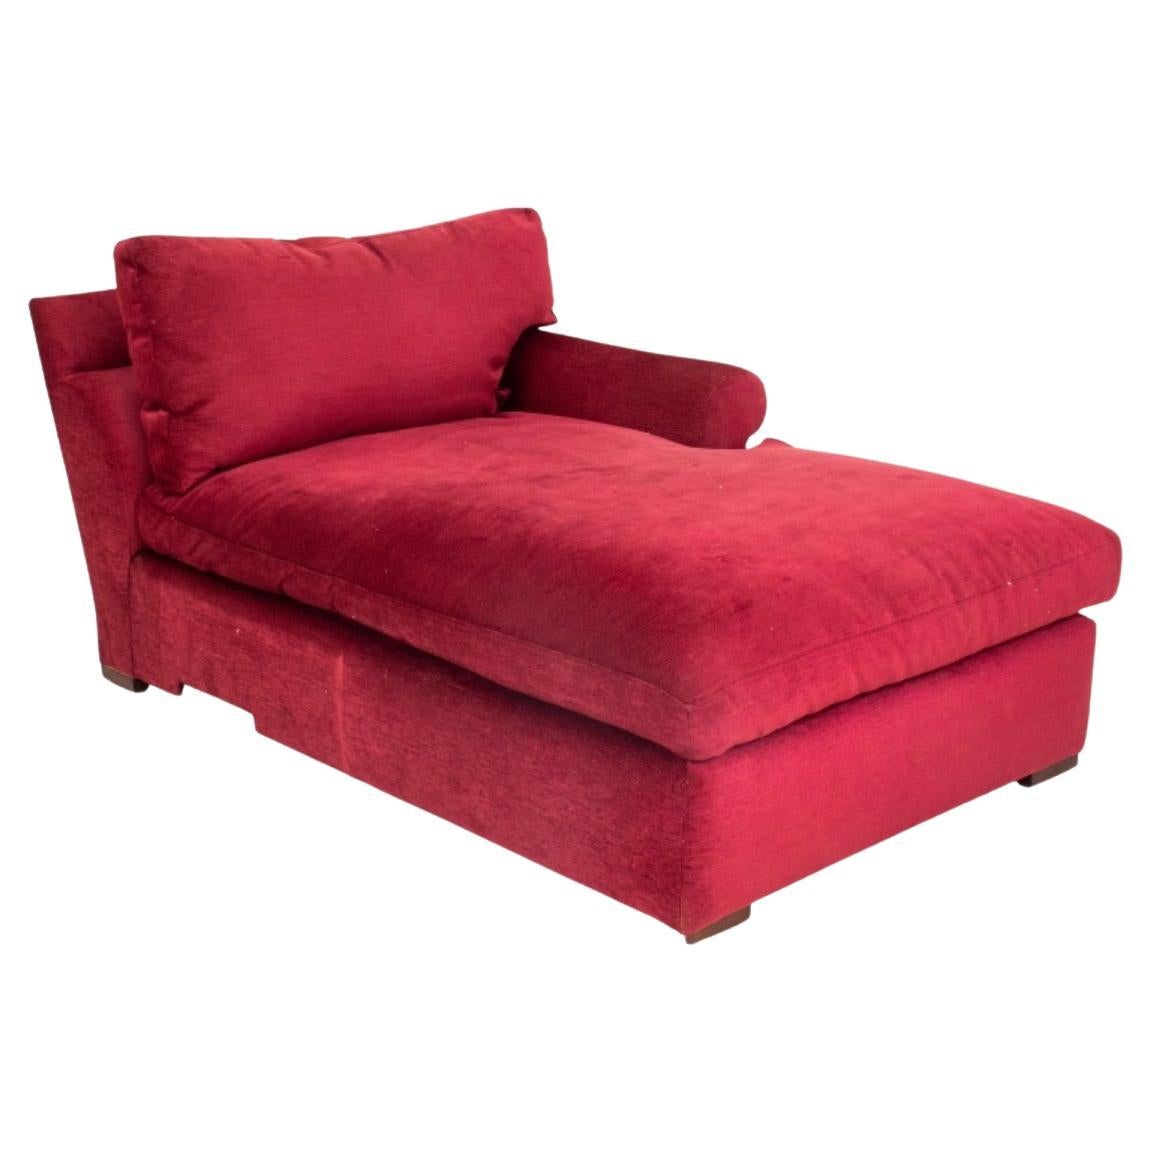 Red Chenille Upholstered Chaise Lounge For Sale